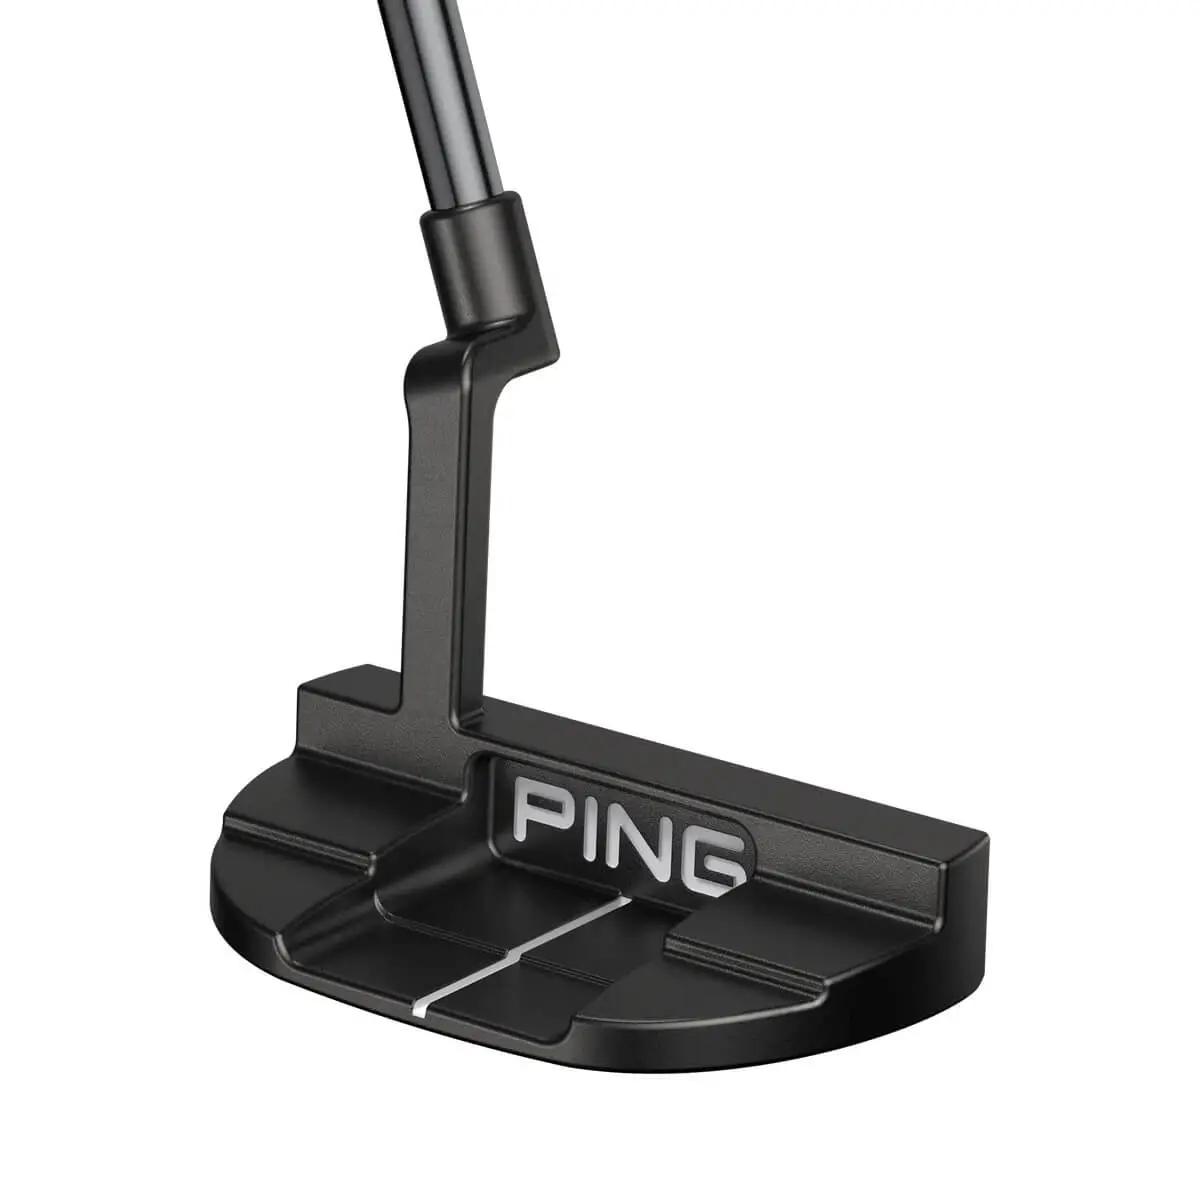 Best Plumber's Neck Putters - 2021 Buyer's Guide